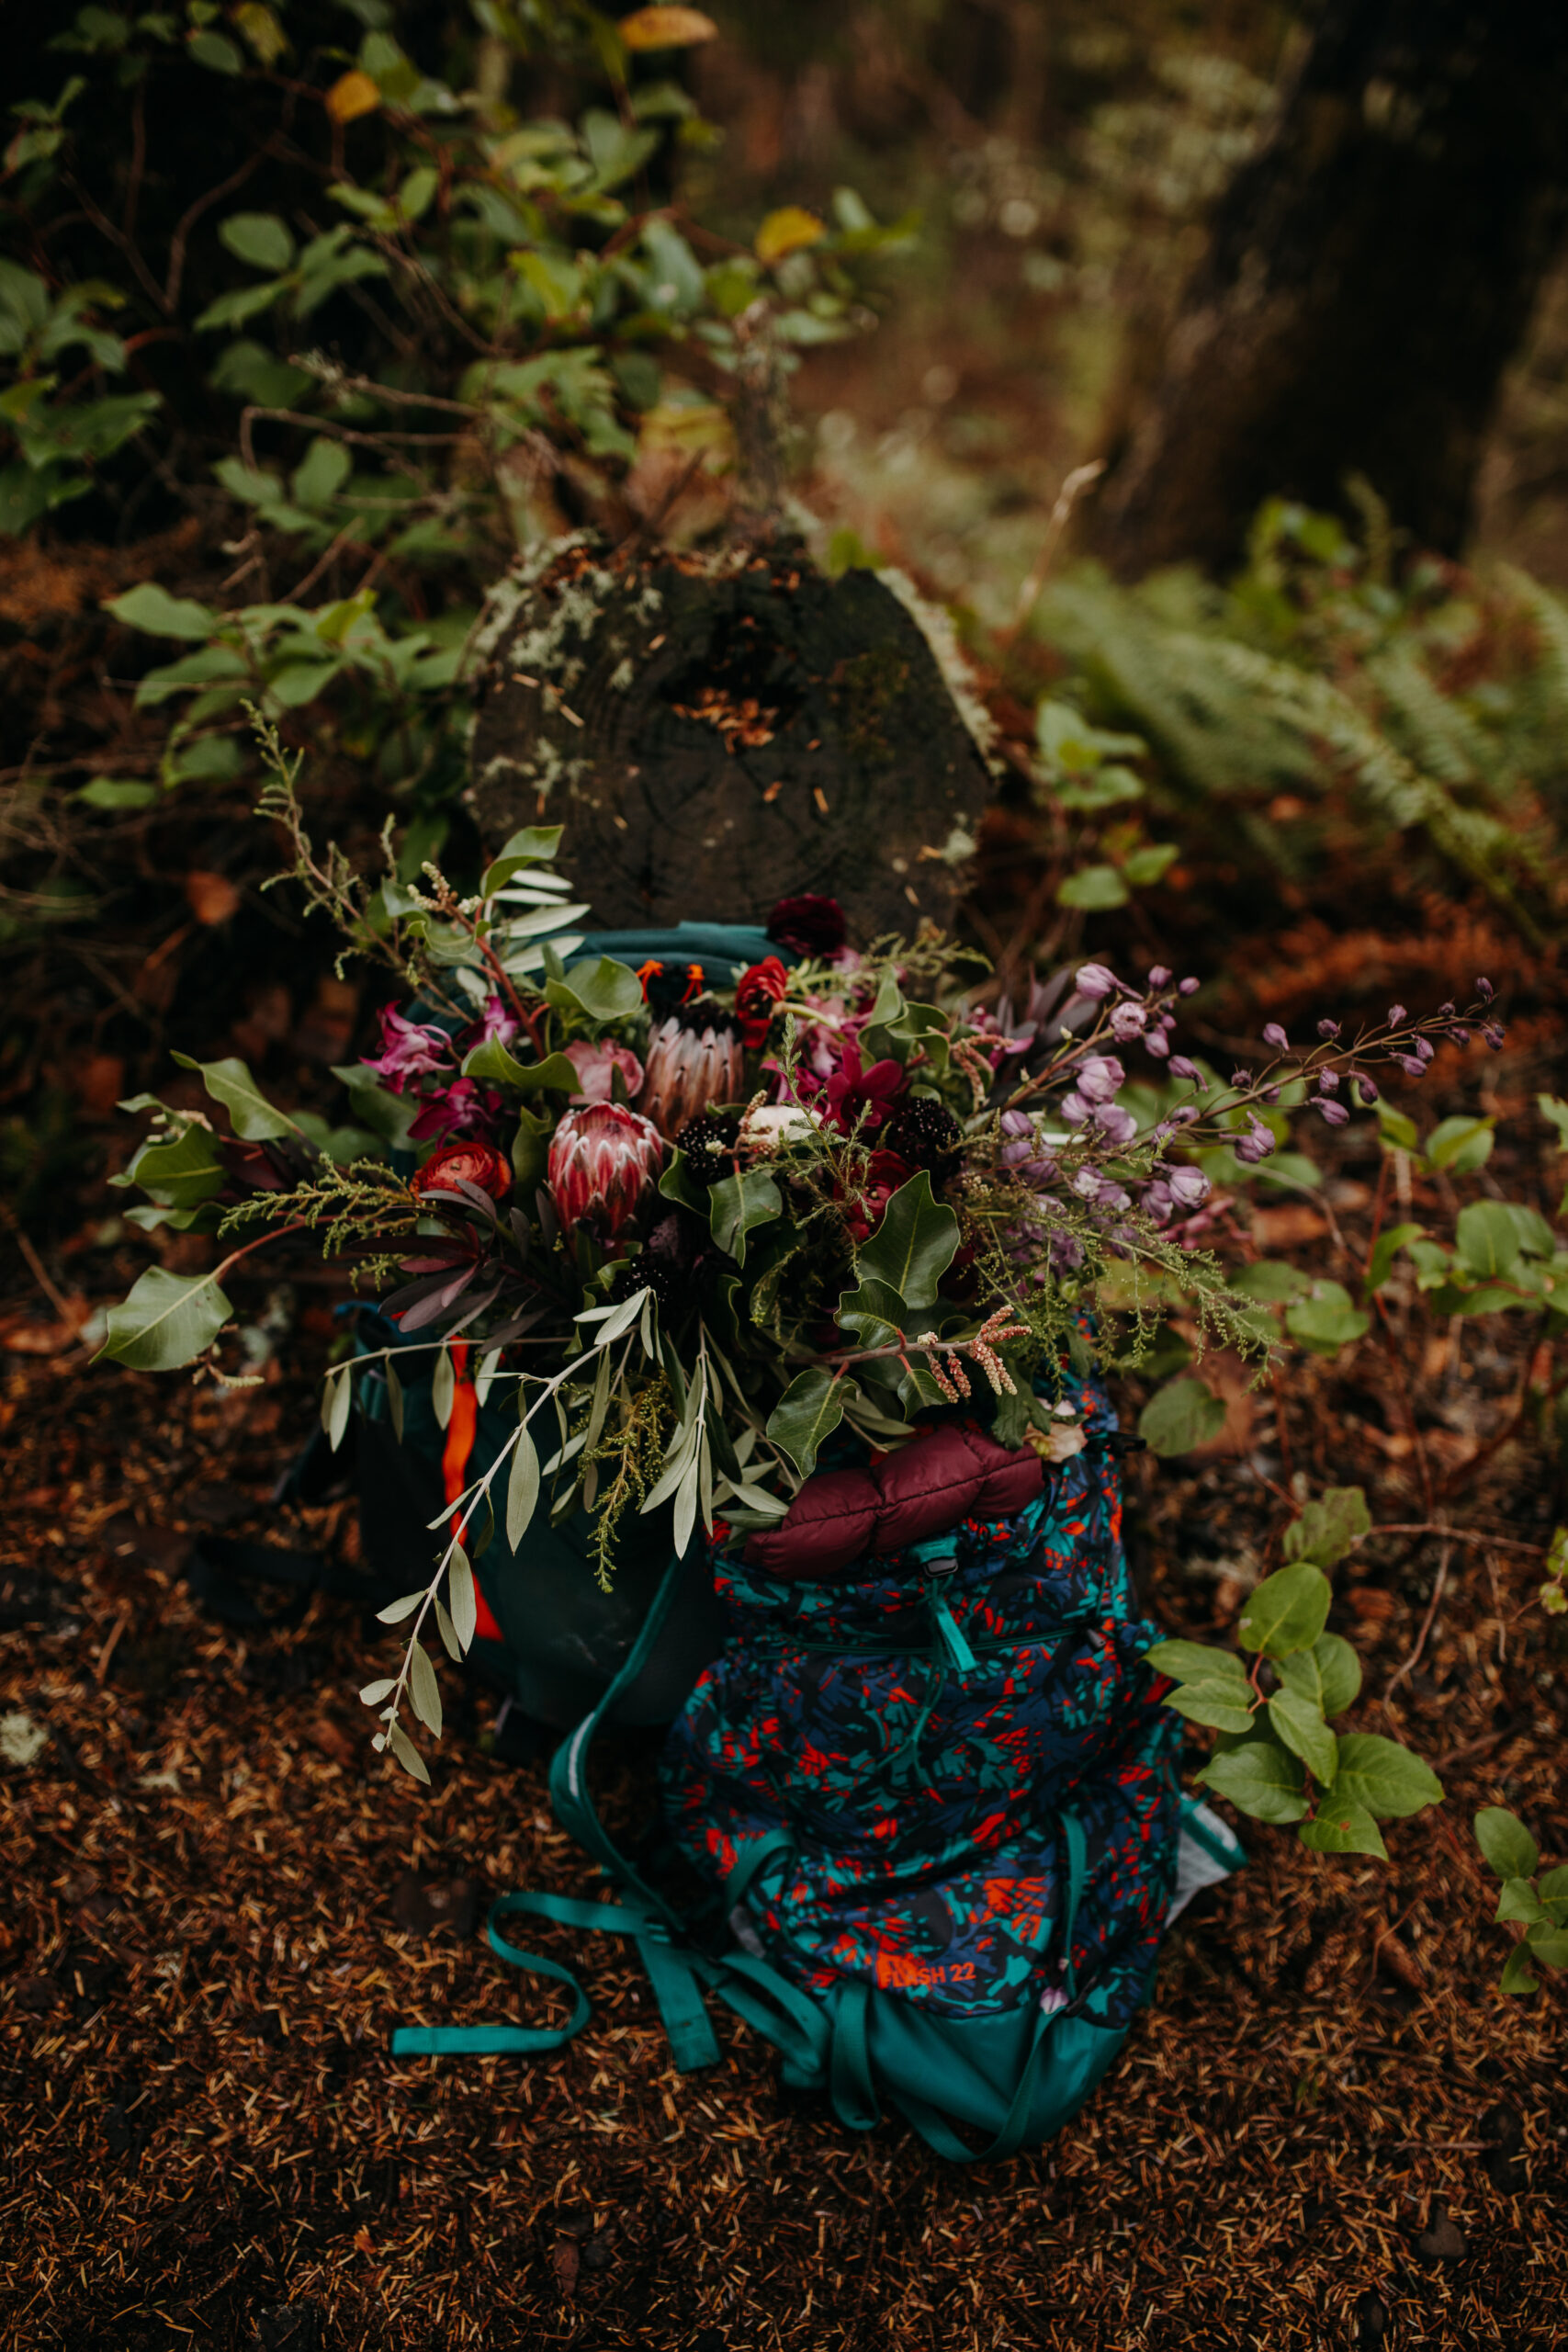 floral bouquet bursts out of hiking backpack sitting on forest floor